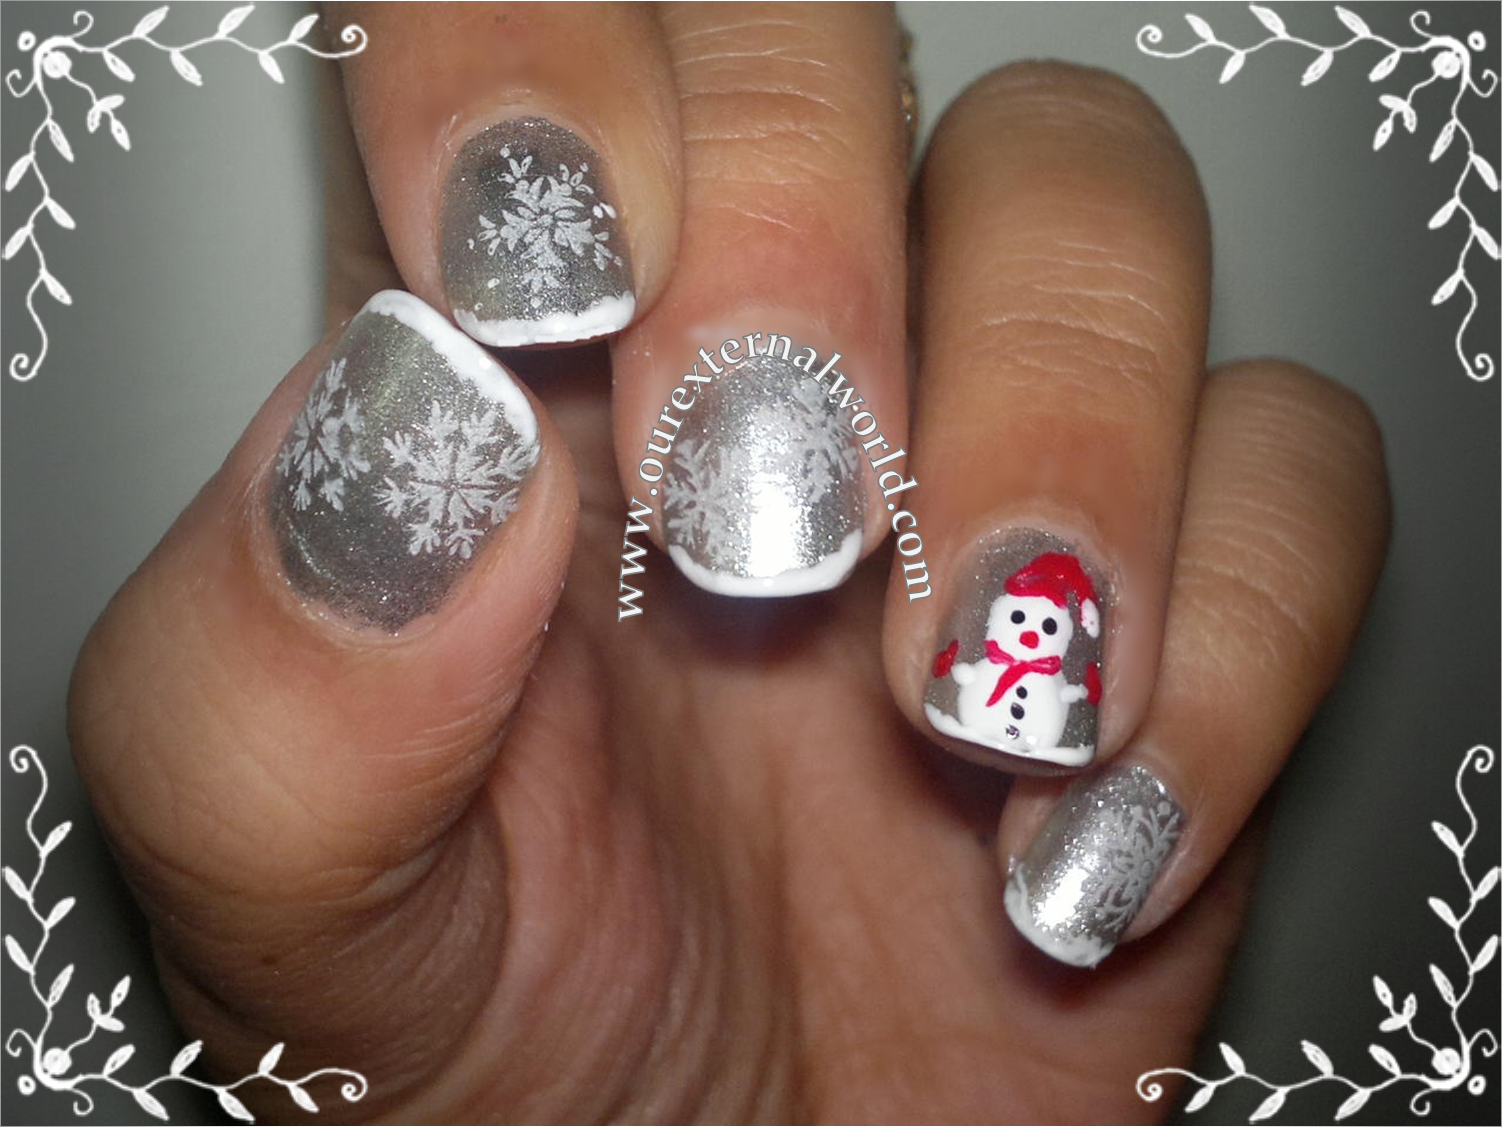 6. Sparkly Snowman Nail Art for Short Nails - wide 7